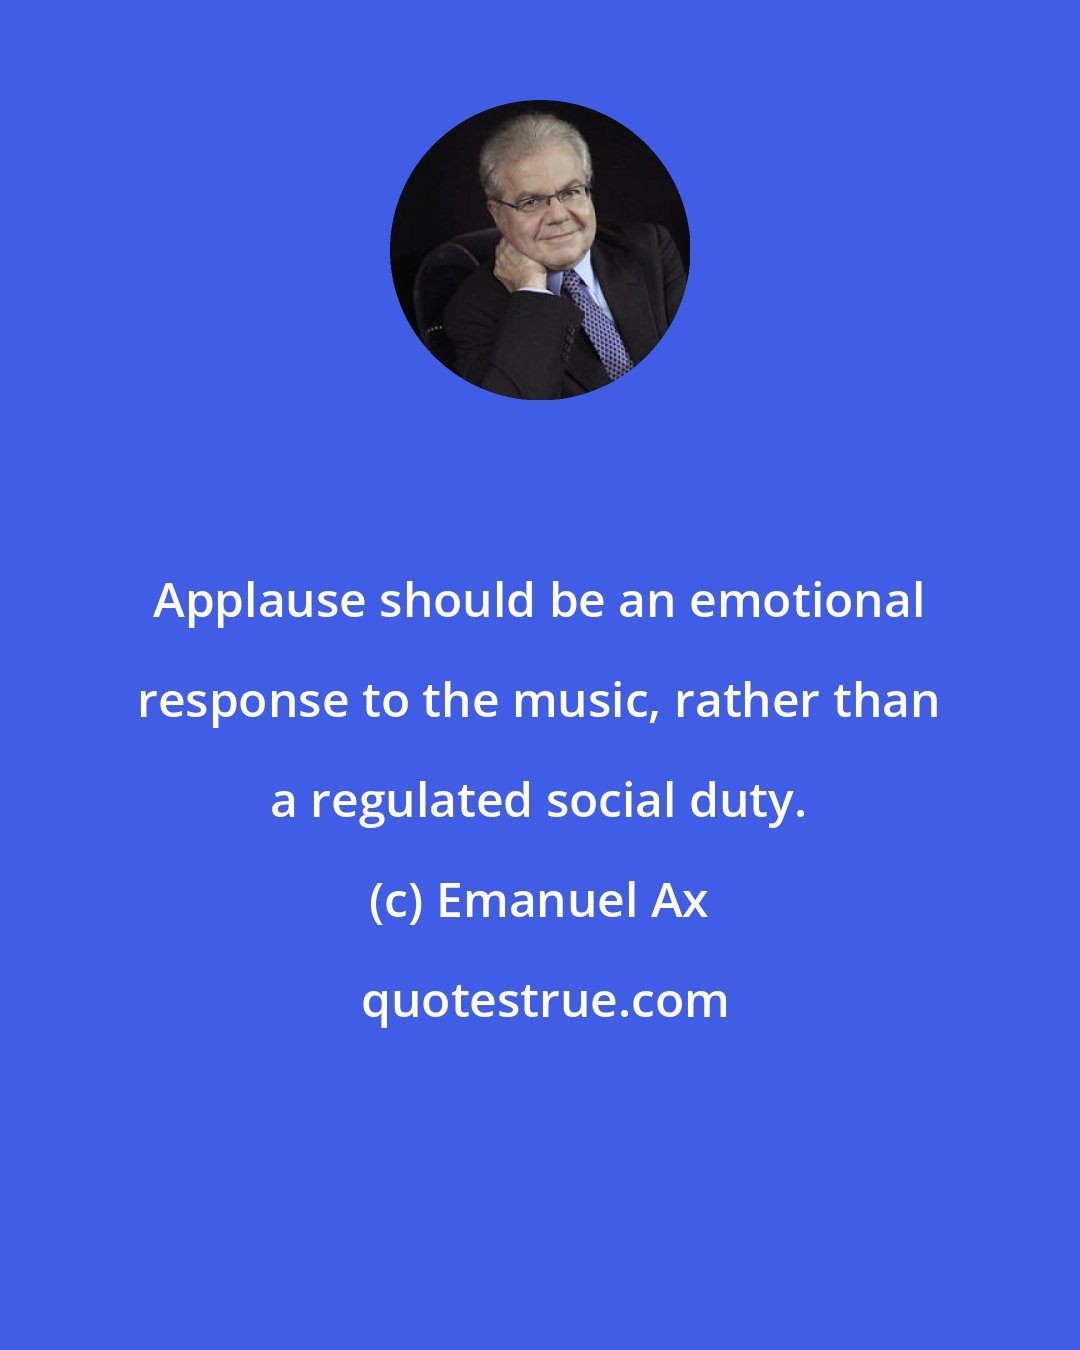 Emanuel Ax: Applause should be an emotional response to the music, rather than a regulated social duty.